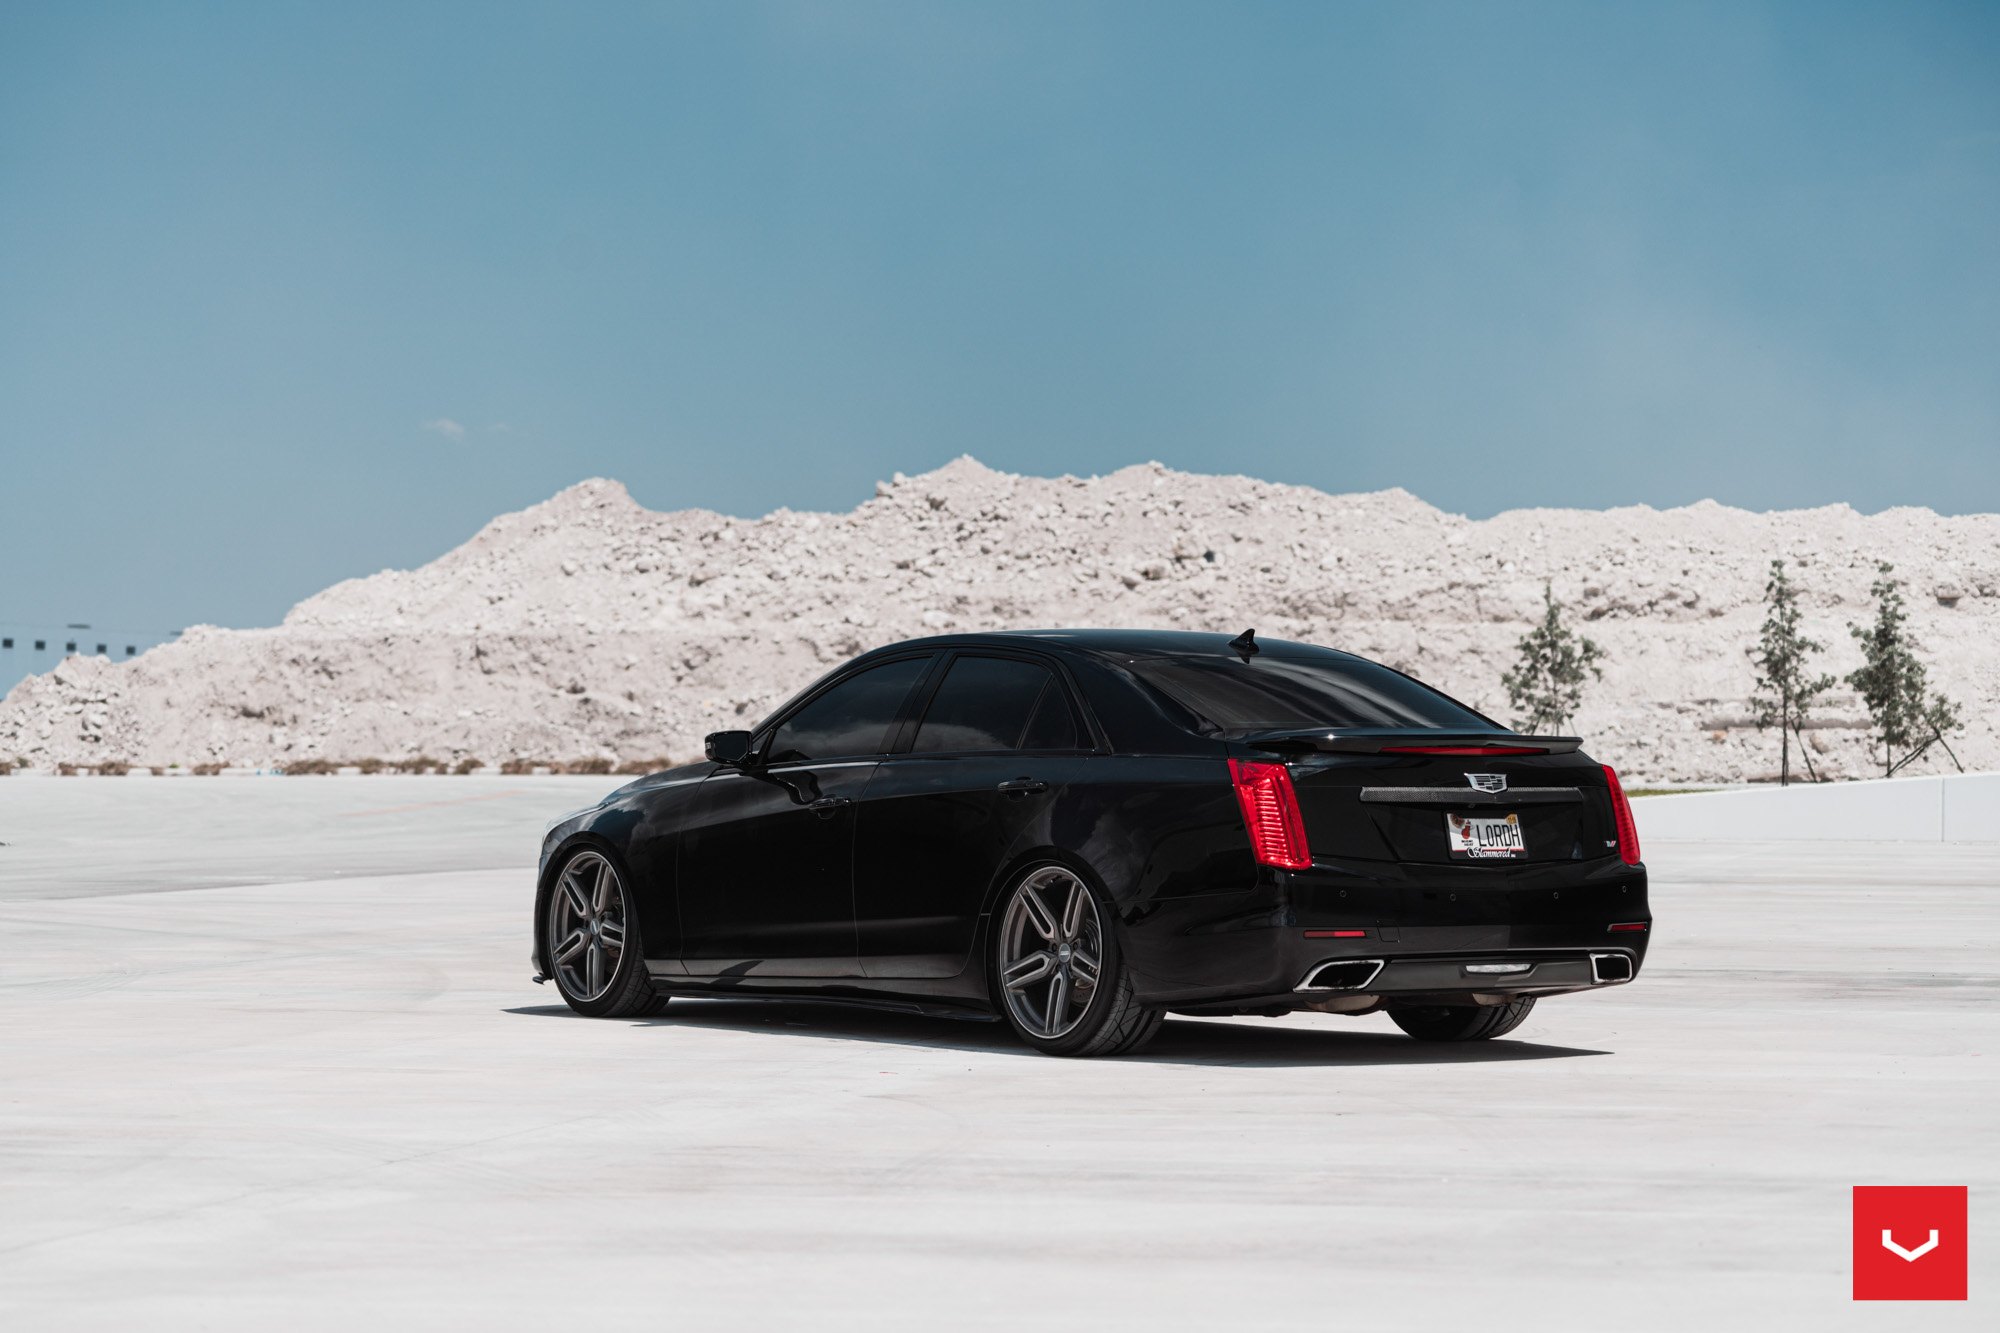 Black Cadillac CTS with Custom Style Rear Spoiler - Photo by Vossen